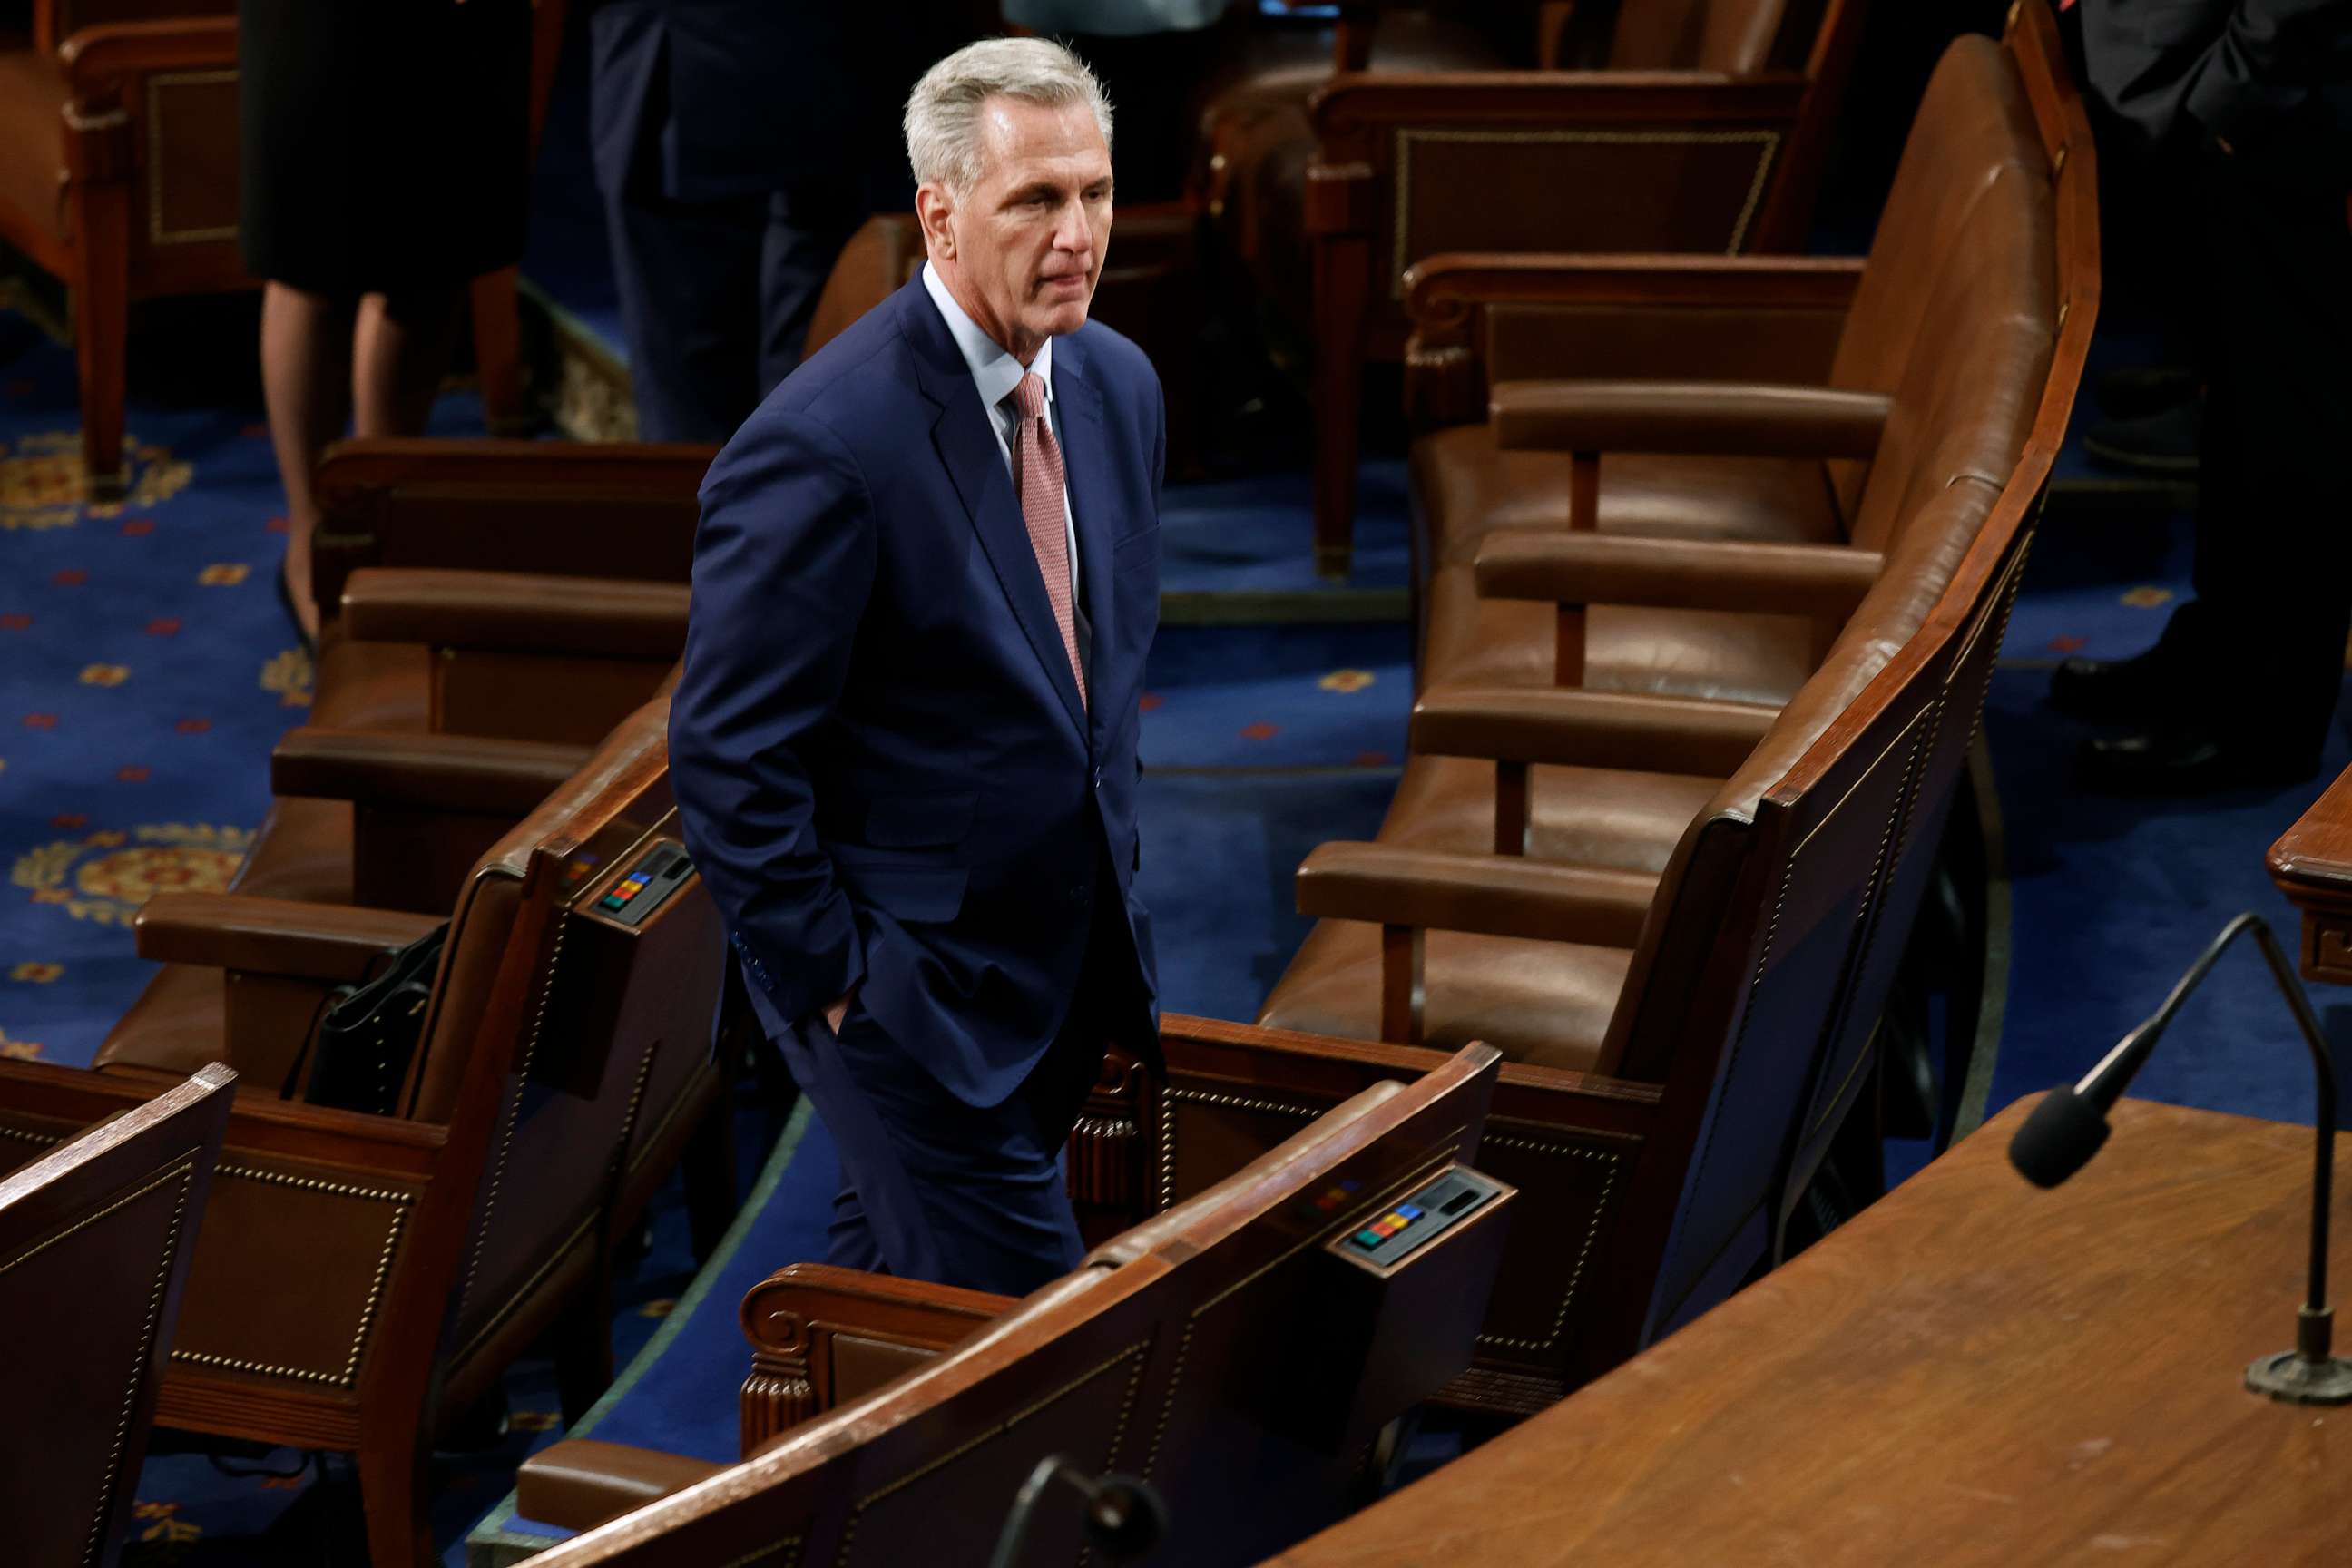 PHOTO: House Minority Leader Kevin McCarthy moves through the House Chamber in between roll call votes for Speaker of the House of the 118th Congress at the U.S. Capitol, Jan. 3, 2023, in Washington.